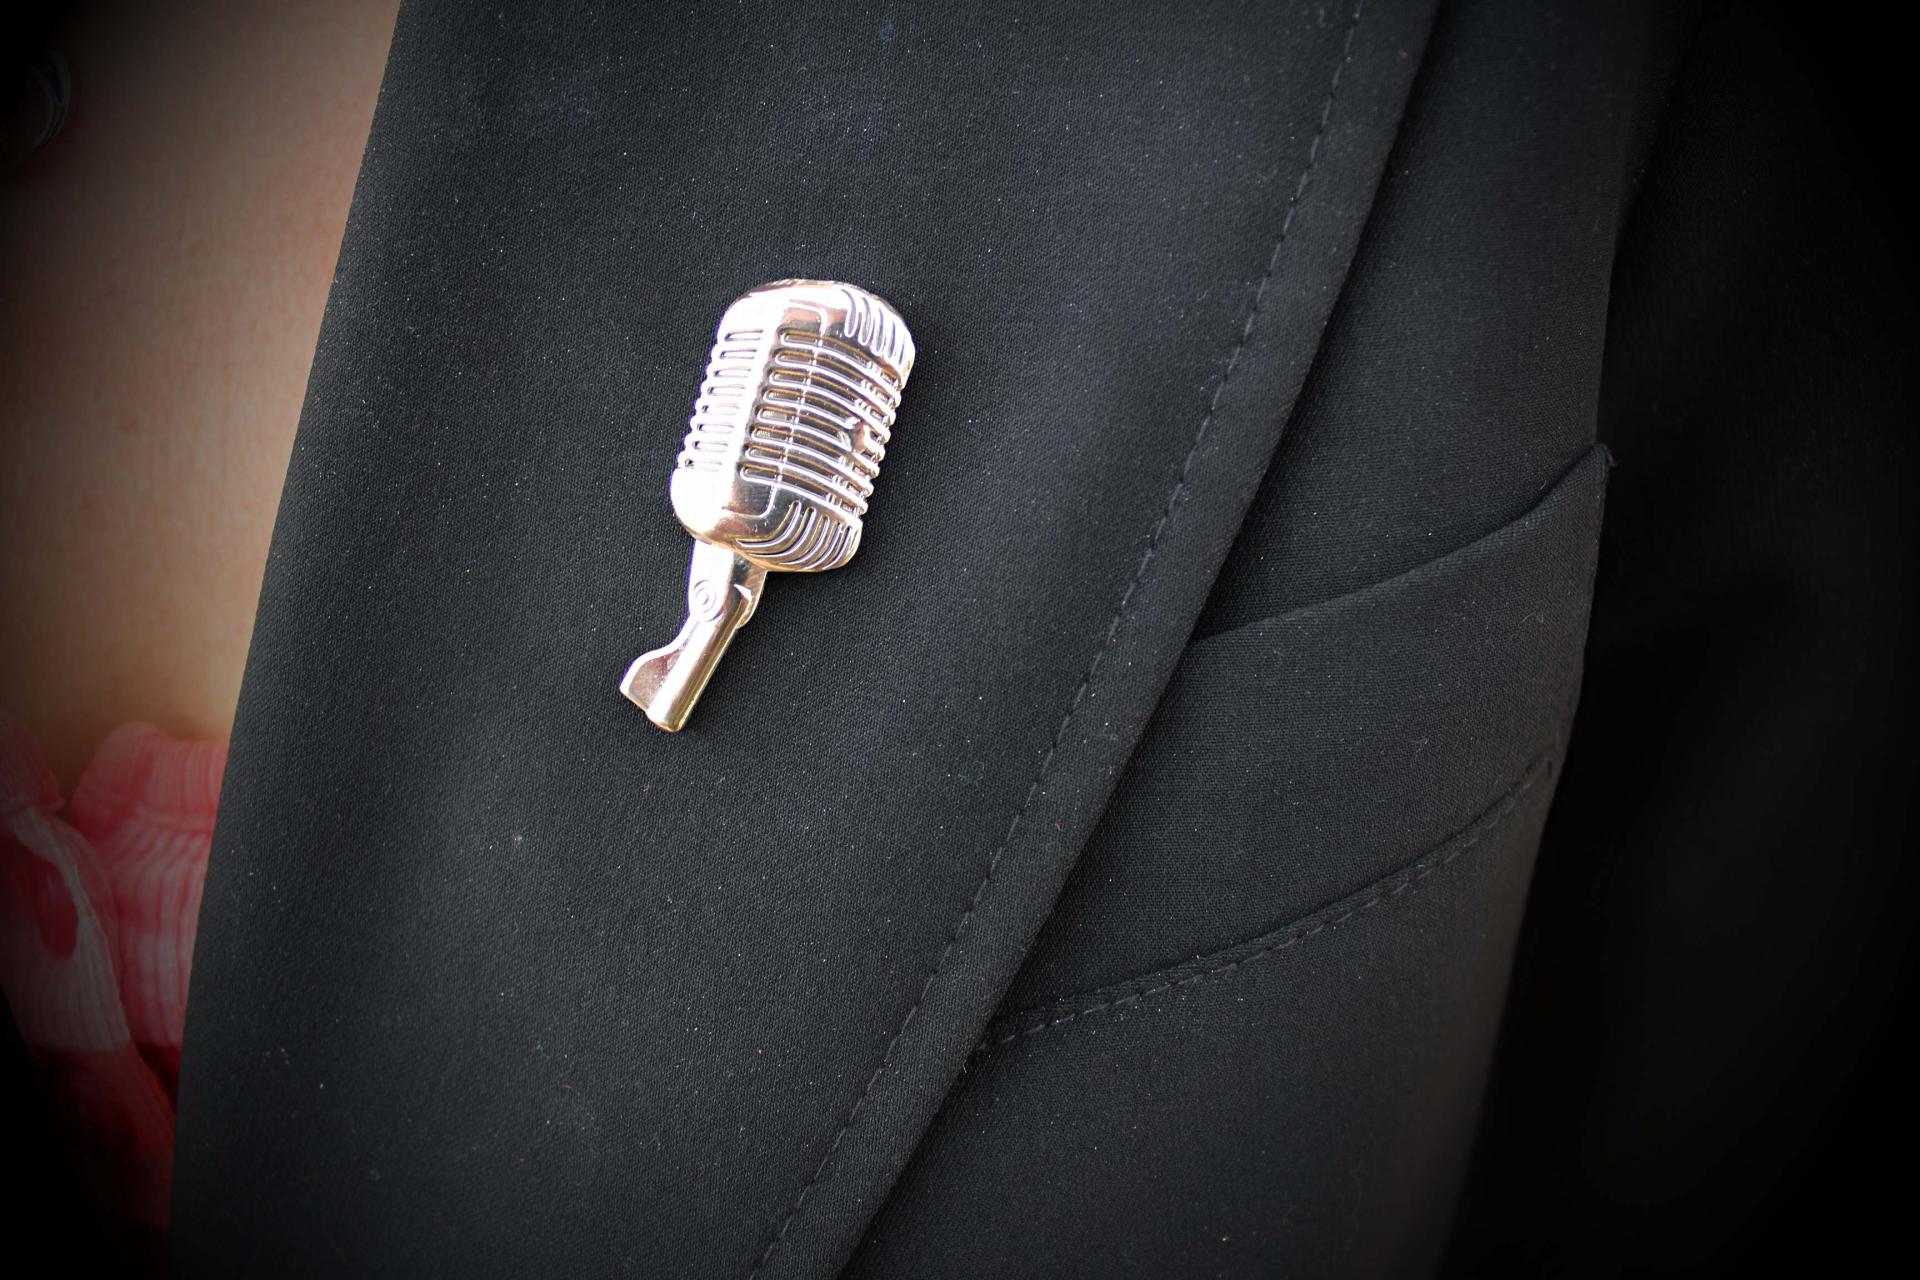 Microphone pin badge styles